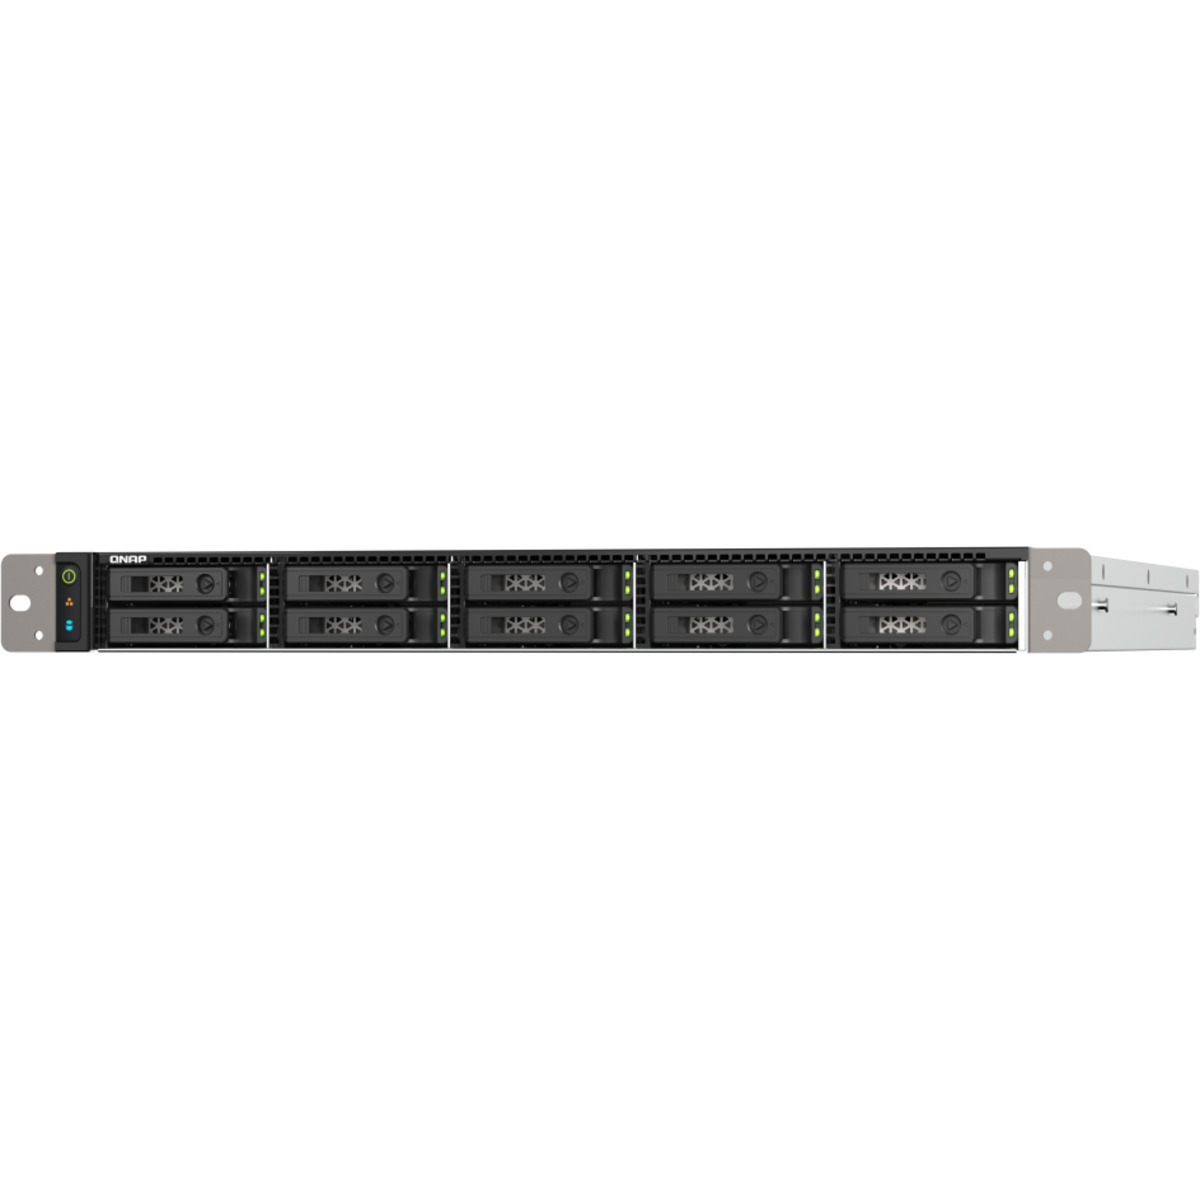 QNAP TS-h1090FU-7302P 14tb 10-Bay RackMount Large Business / Enterprise NAS - Network Attached Storage Device 7x2tb Samsung 870 QVO MZ-77Q2T0 2.5 560/530MB/s SATA 6Gb/s SSD CONSUMER Class Drives Installed - Burn-In Tested TS-h1090FU-7302P